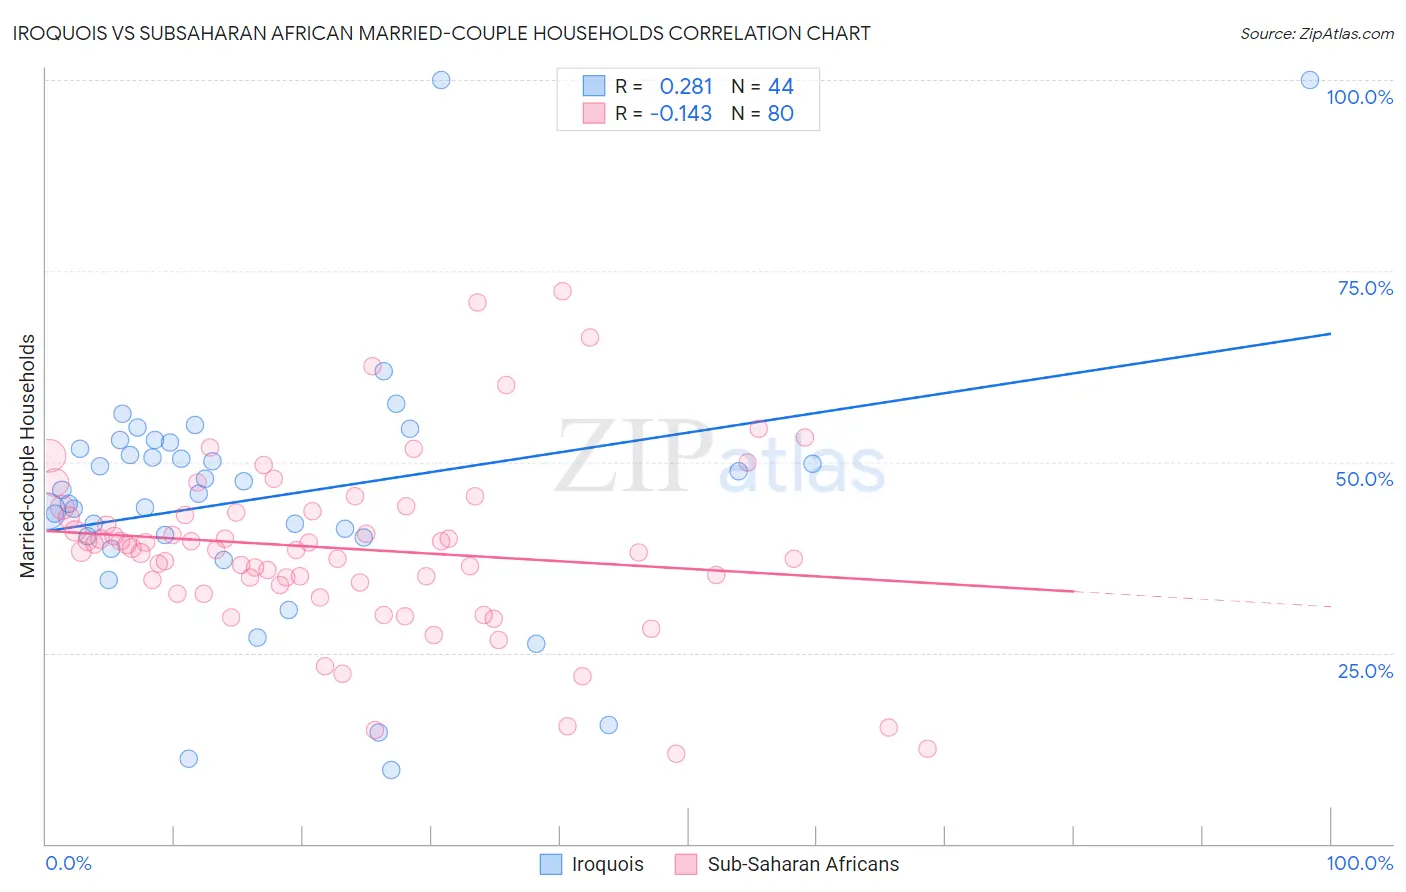 Iroquois vs Subsaharan African Married-couple Households